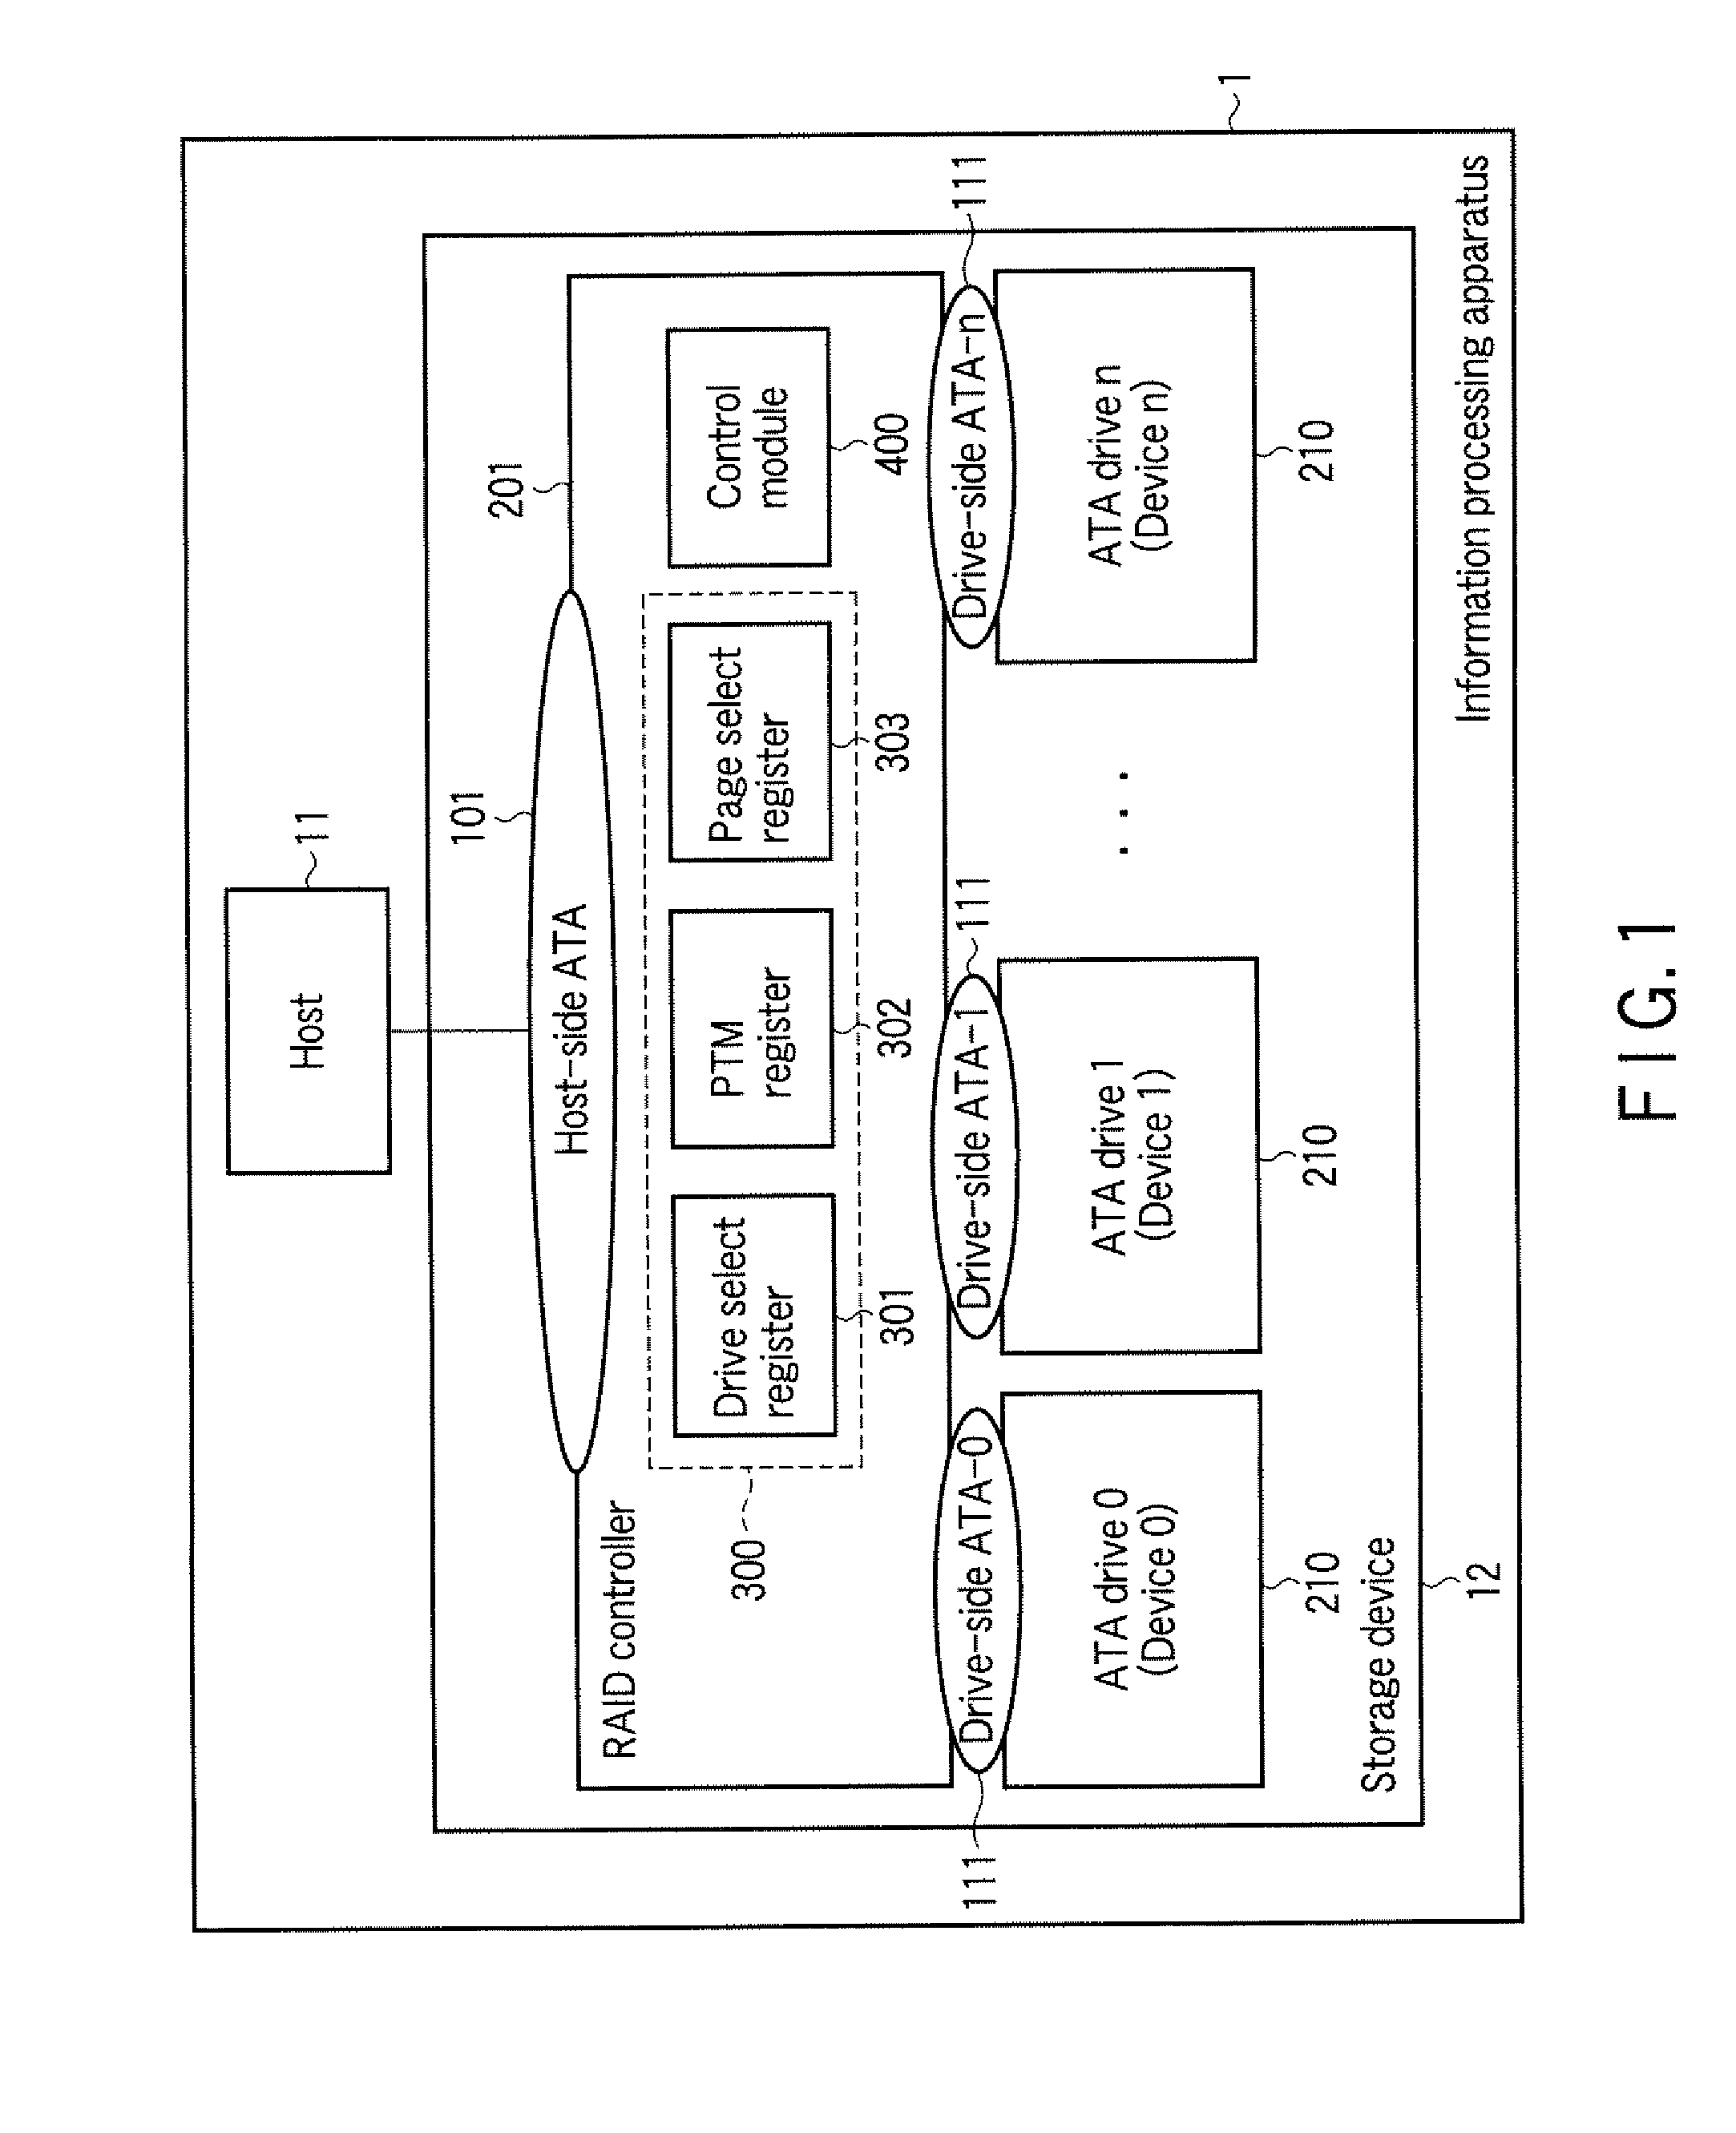 Disk array control device and storage device